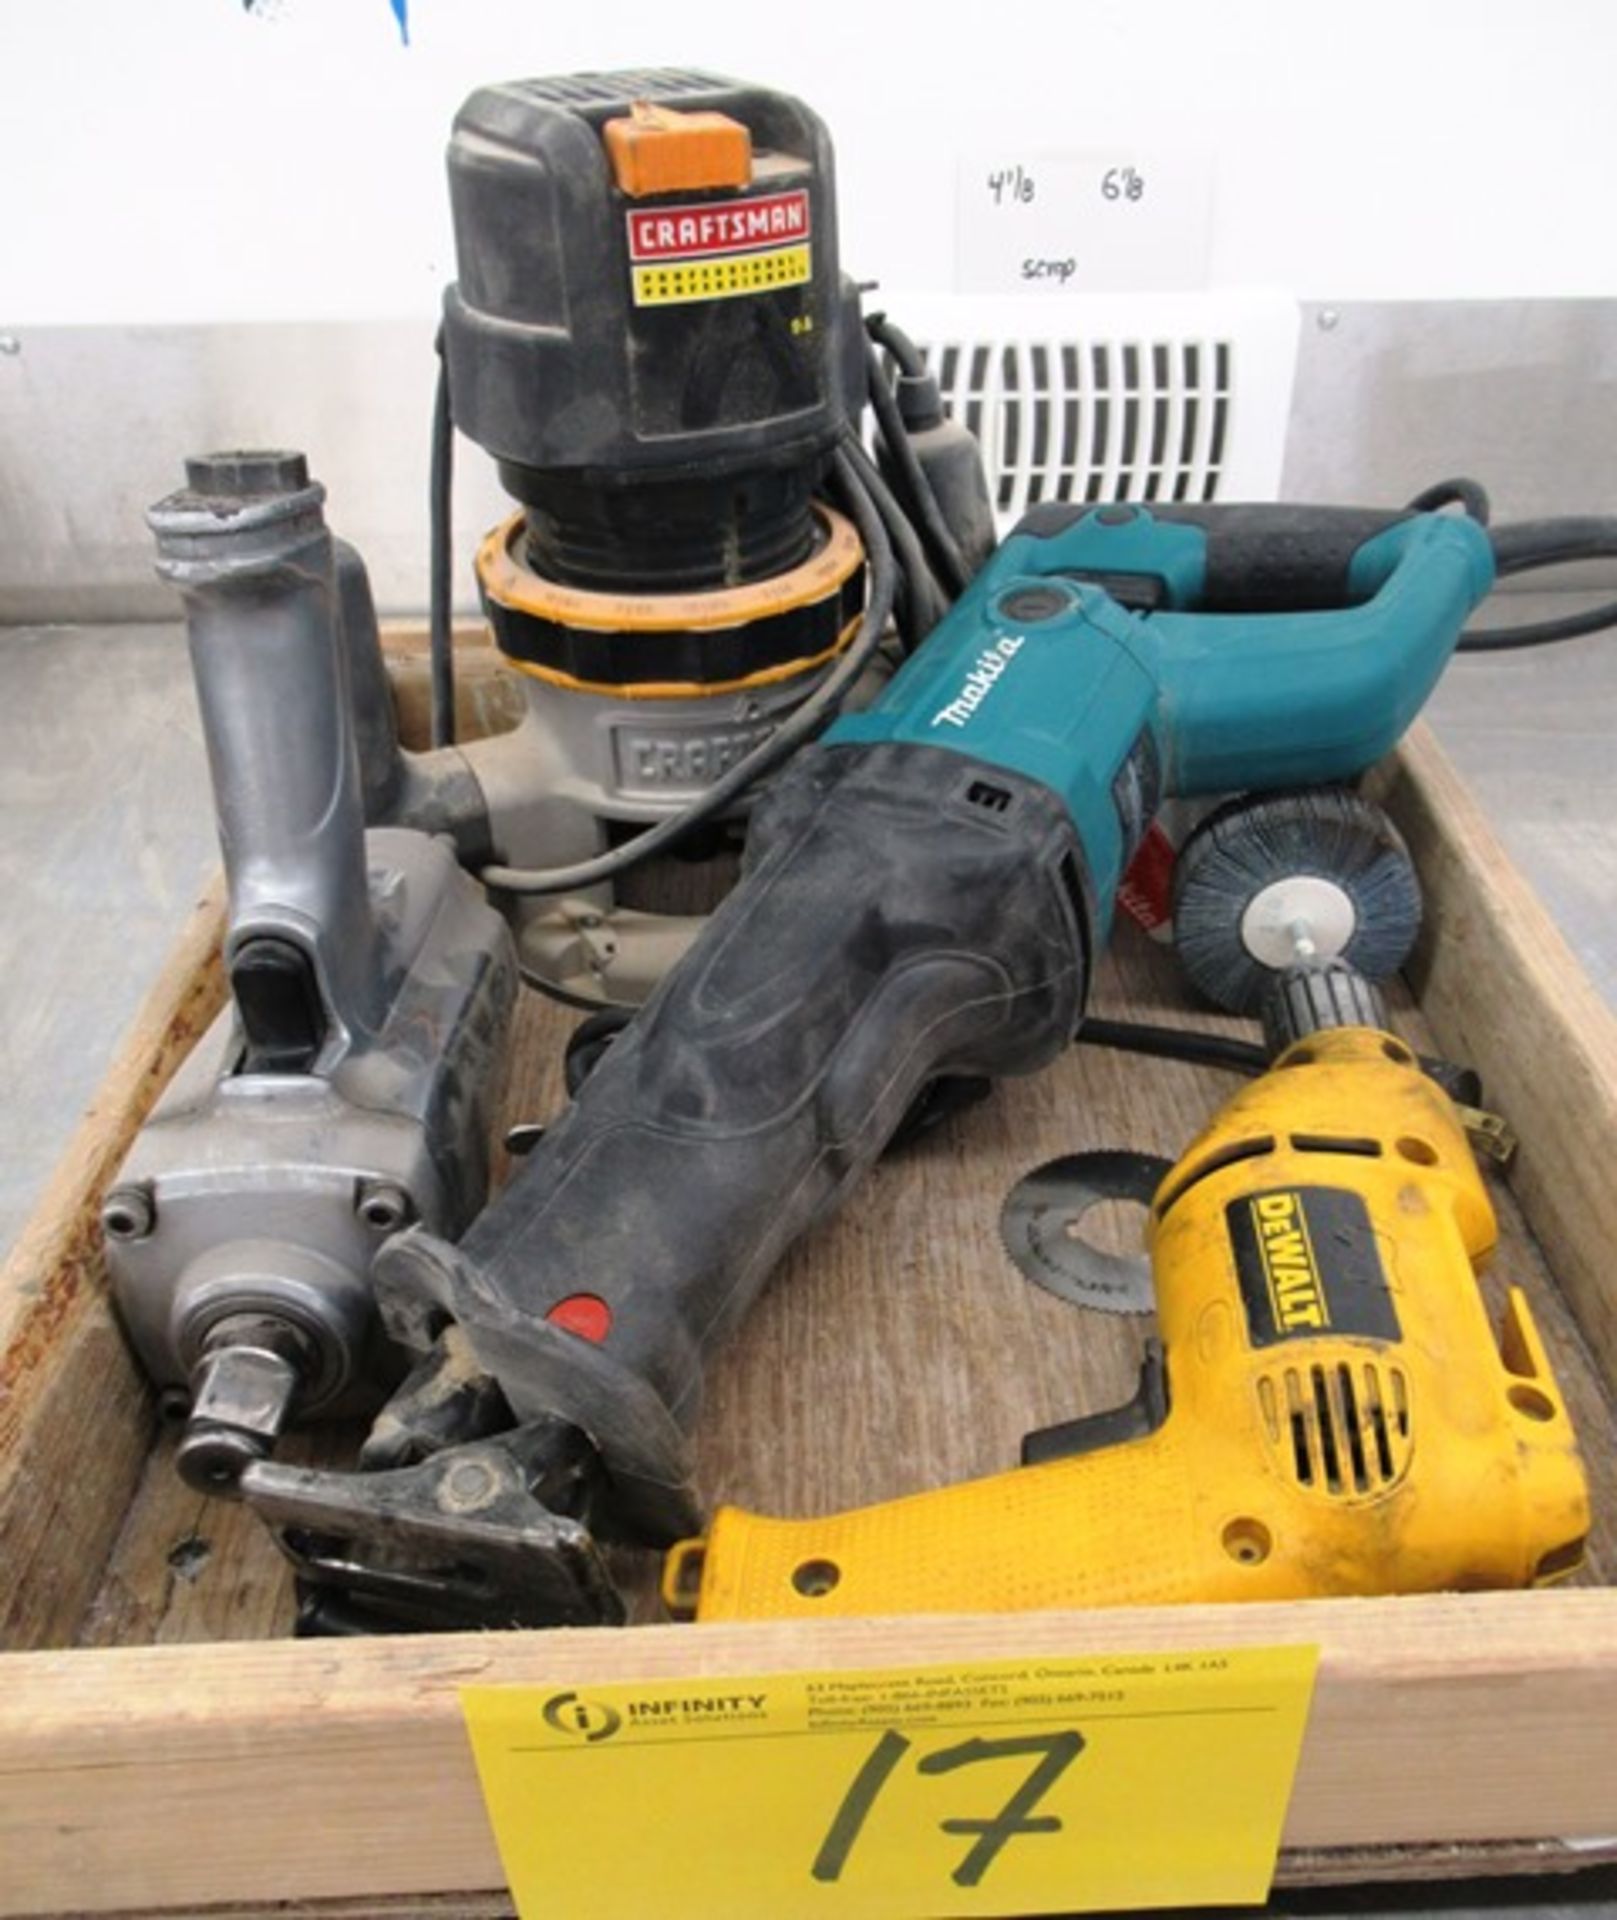 TRAY OF IMPACT WRENCH, SAWALL, DRILL, ROUTER